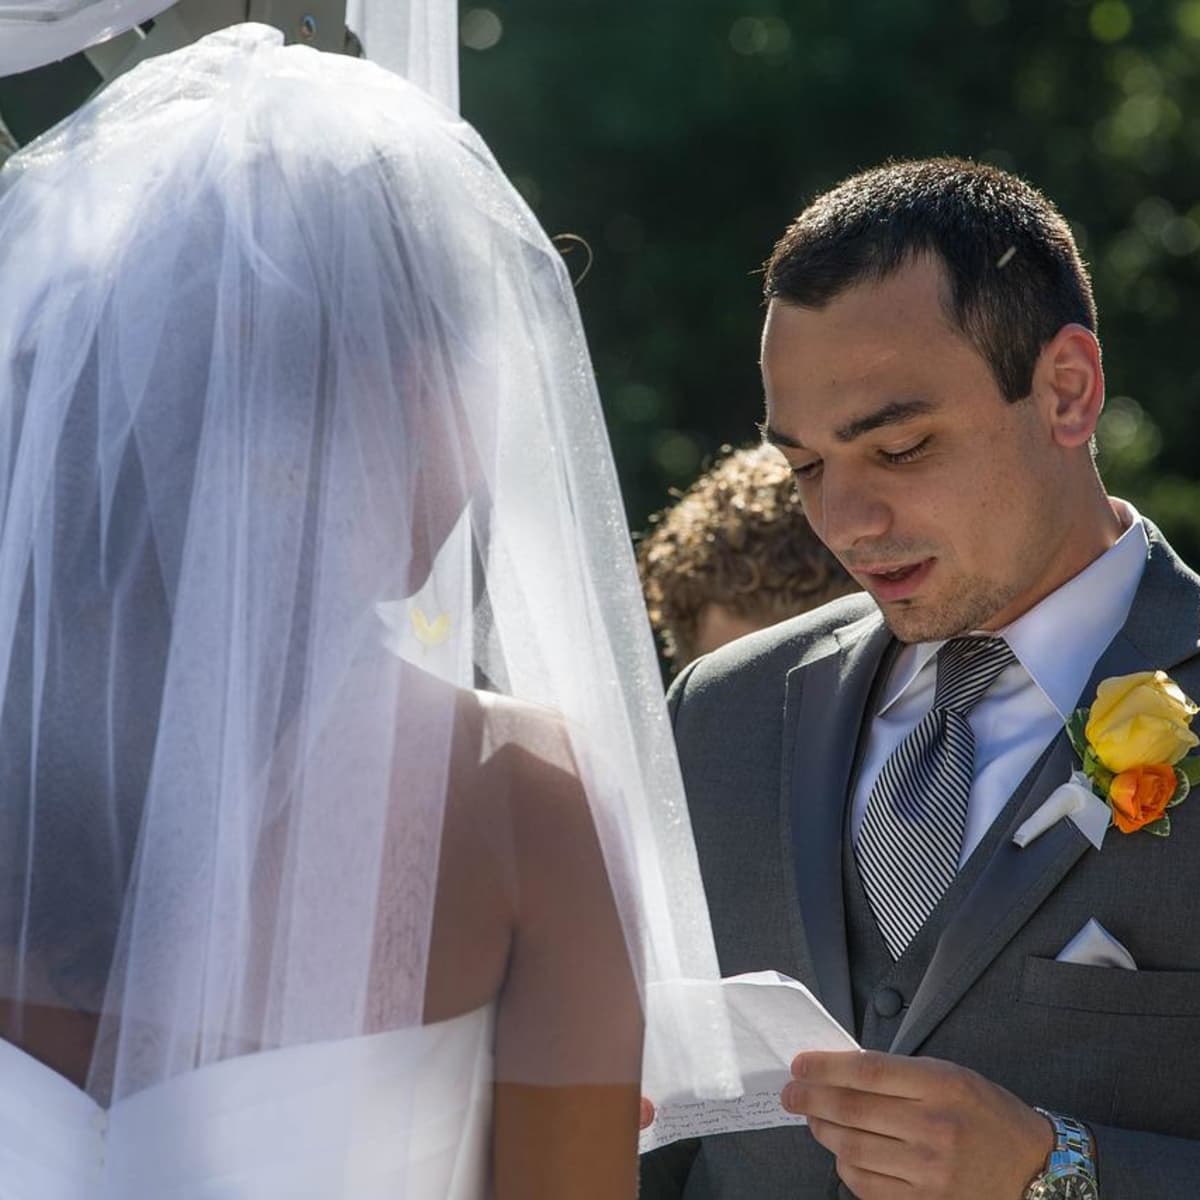 Writing Your Own Funny Wedding Vows - Holidappy